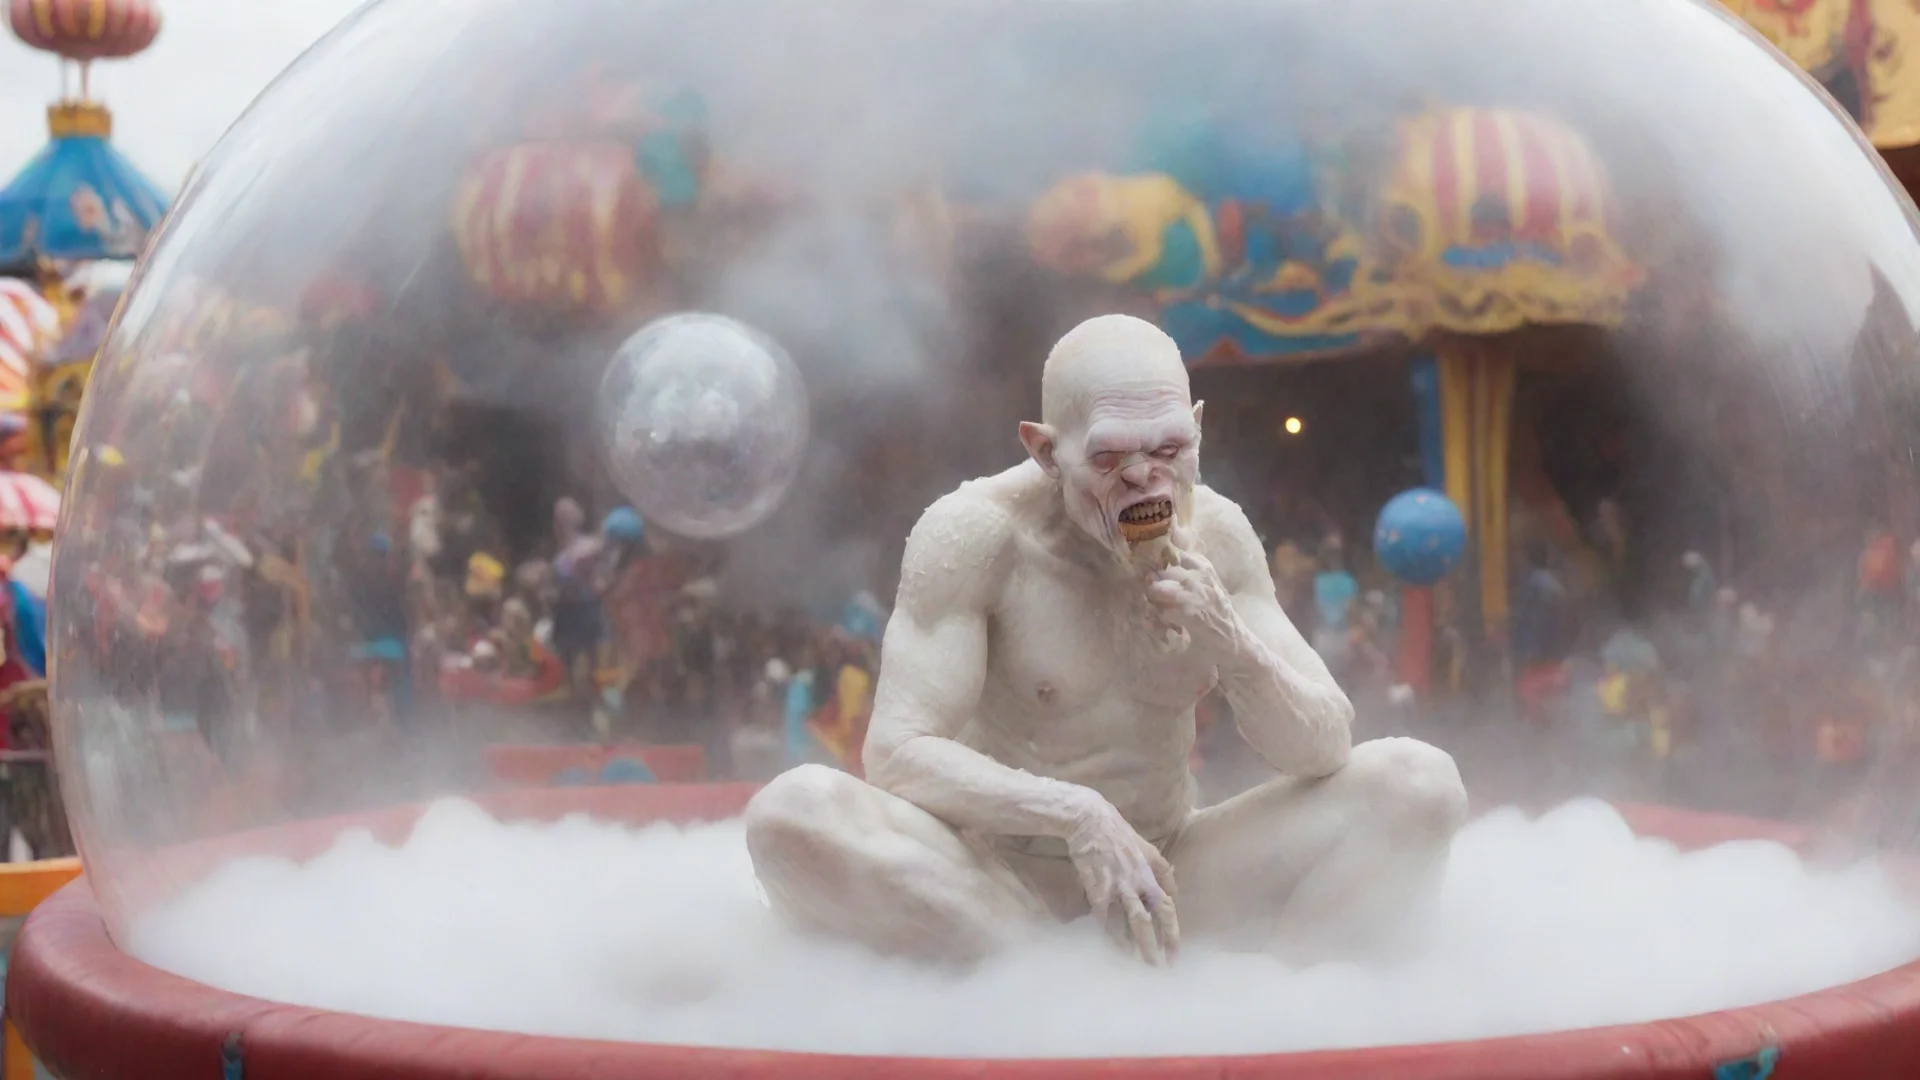 aitrending albino half ork sitting inside a bubble floating over a carnival in a cle good looking fantastic 1 wide